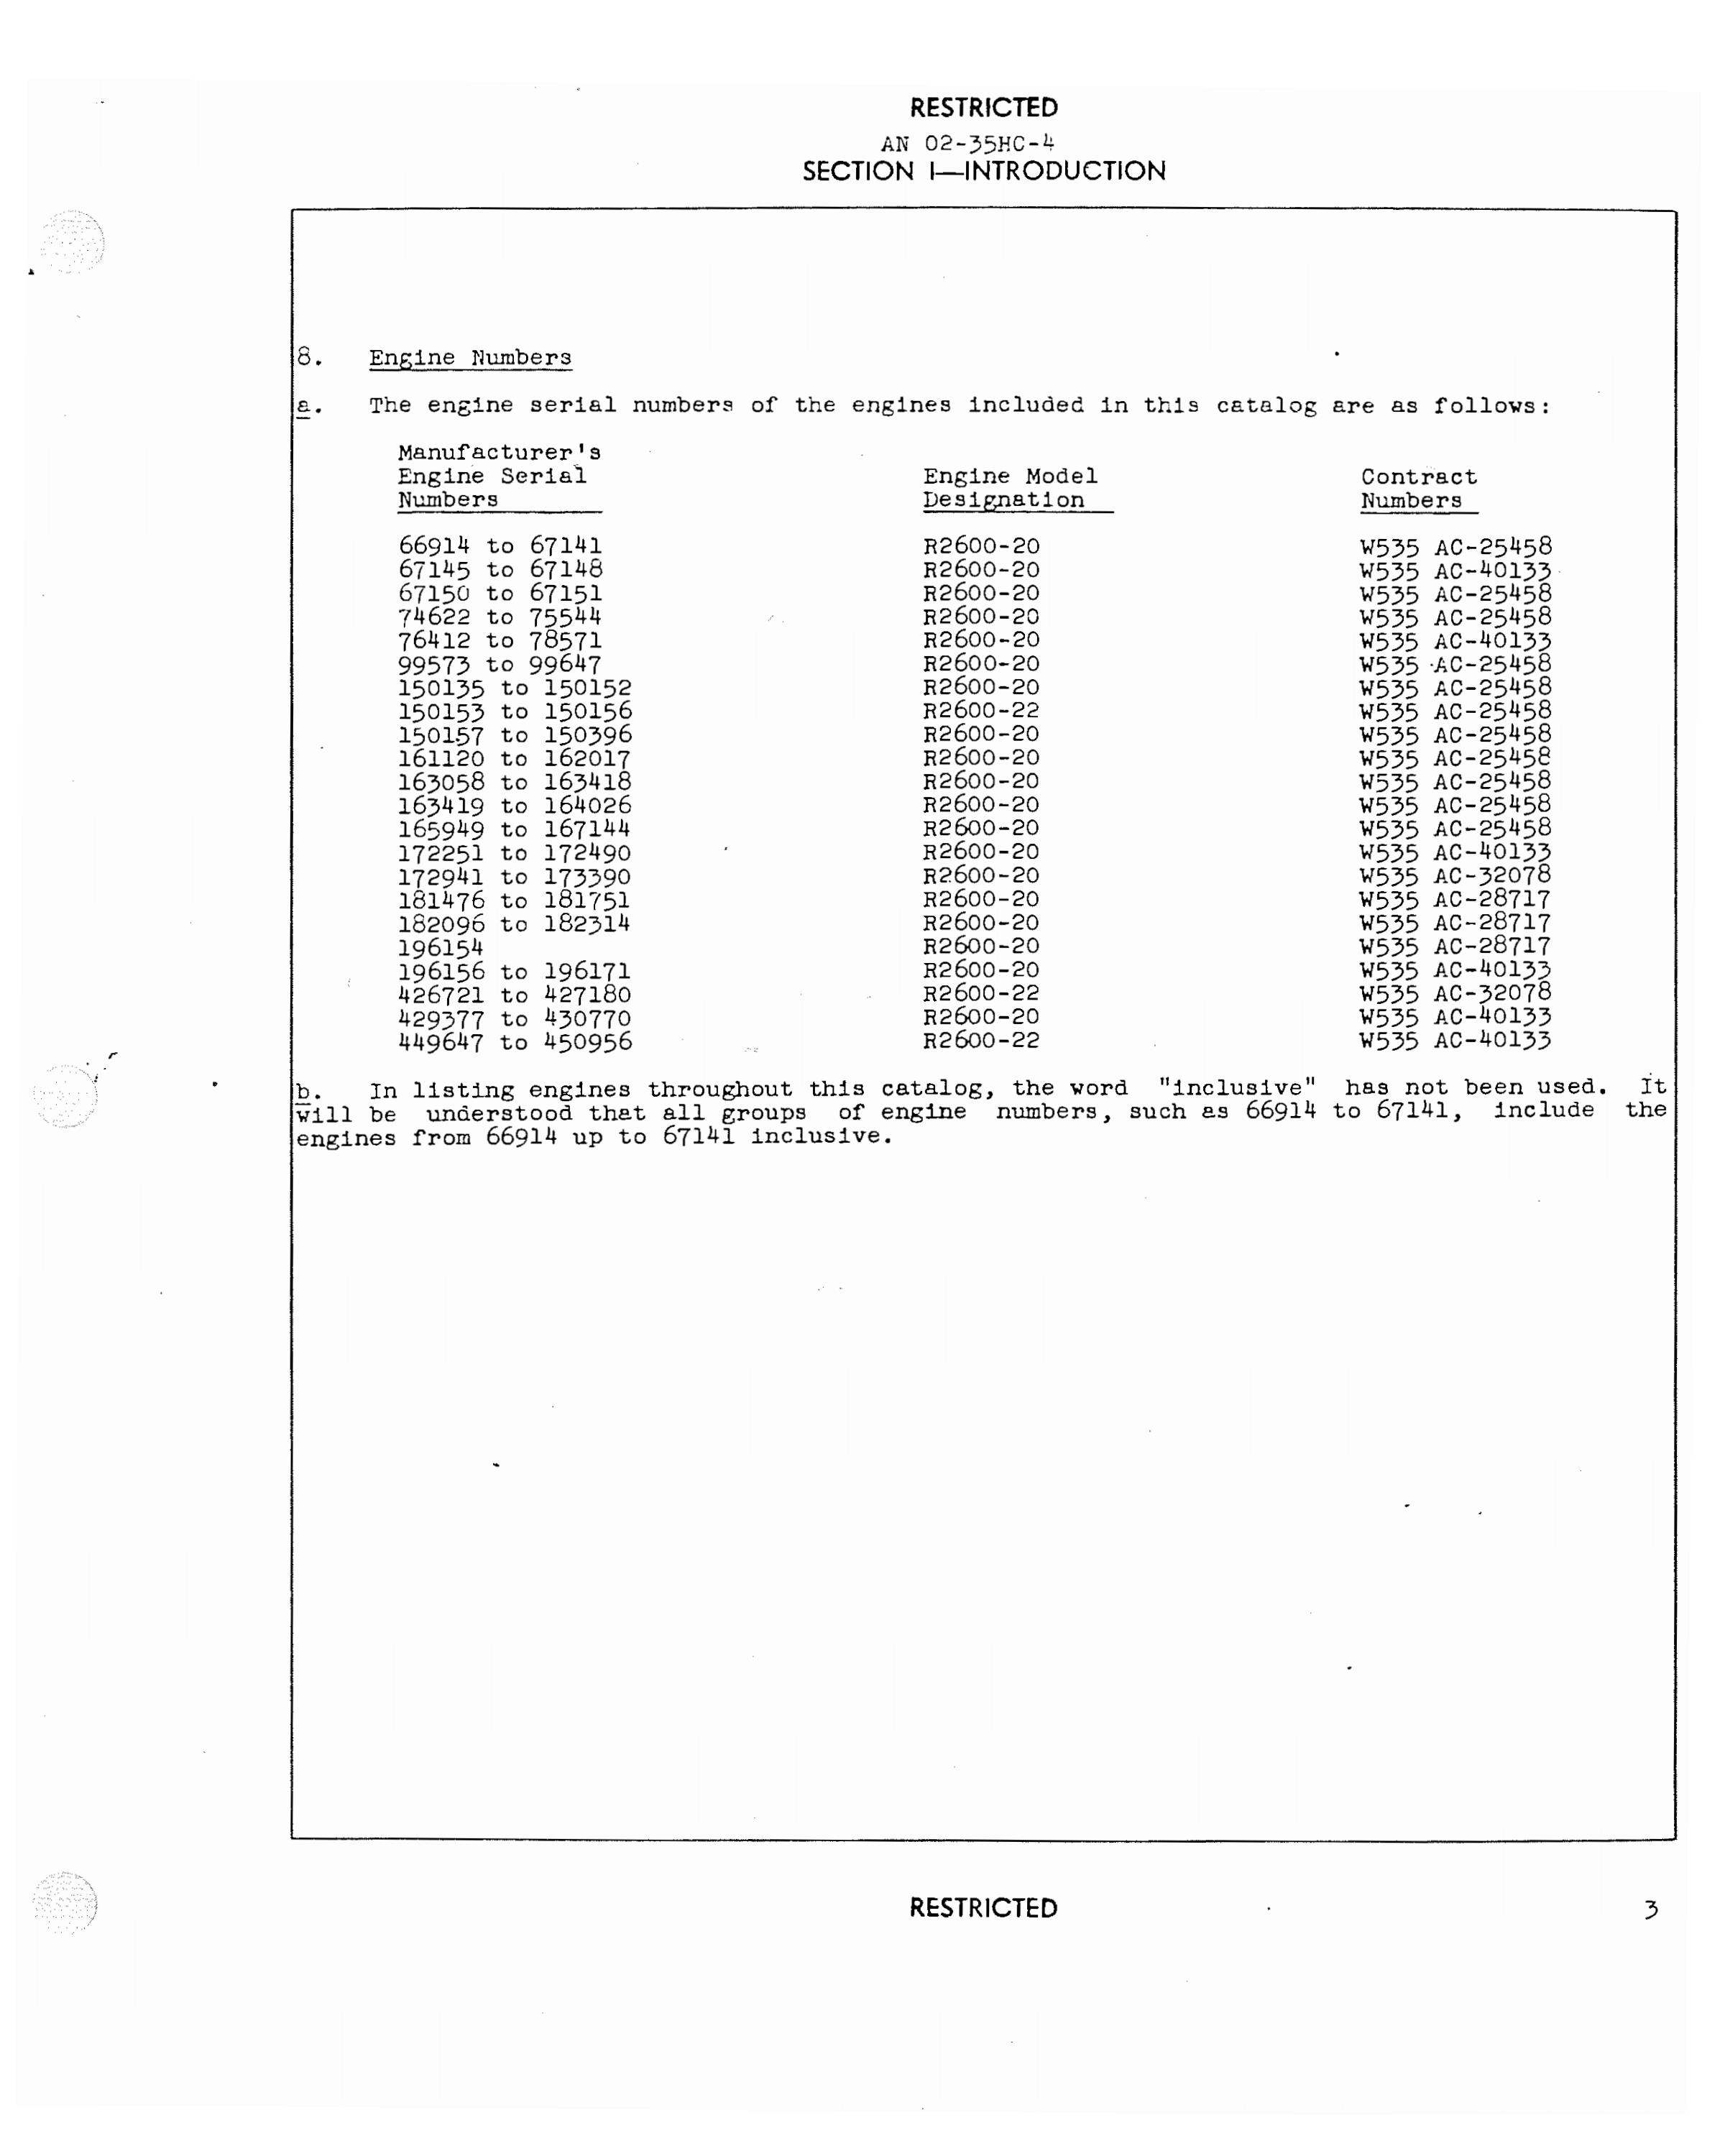 Sample page 7 from AirCorps Library document: Parts Catalog for Aircraft Engines Models R2600-20 and R-2600-22